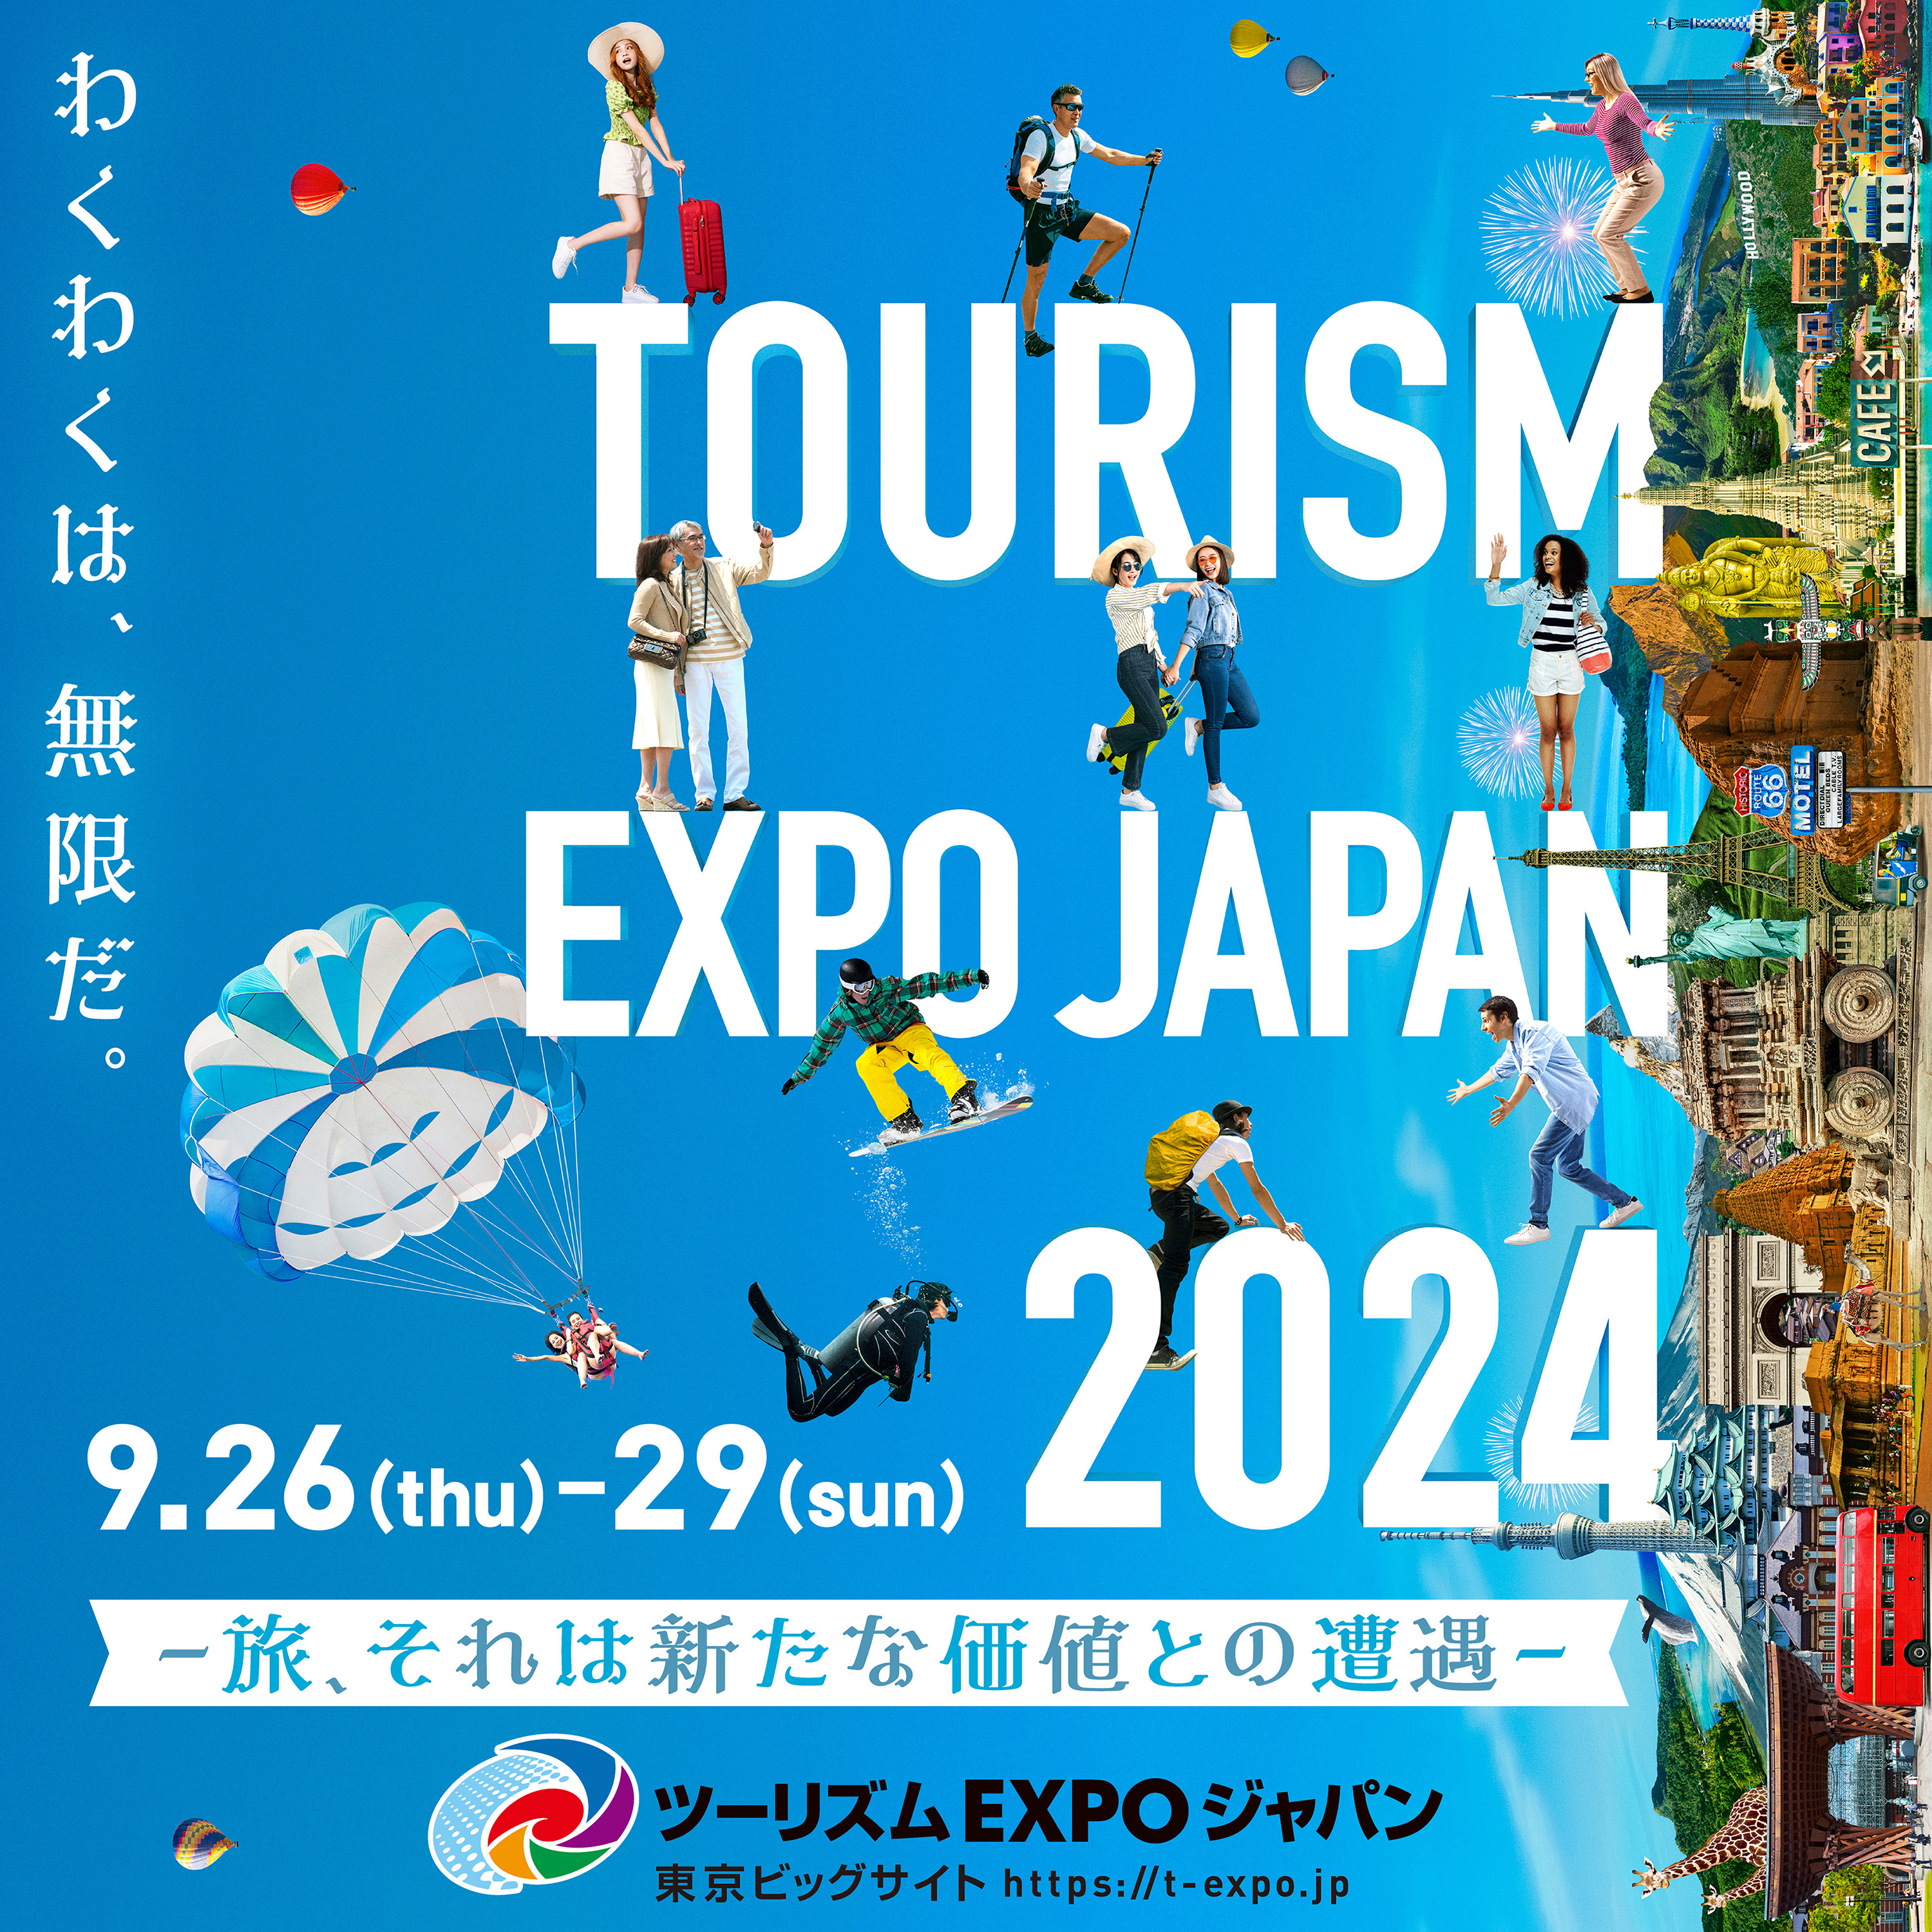 Tourism EXPO Japan Key Visual(for Instagram)